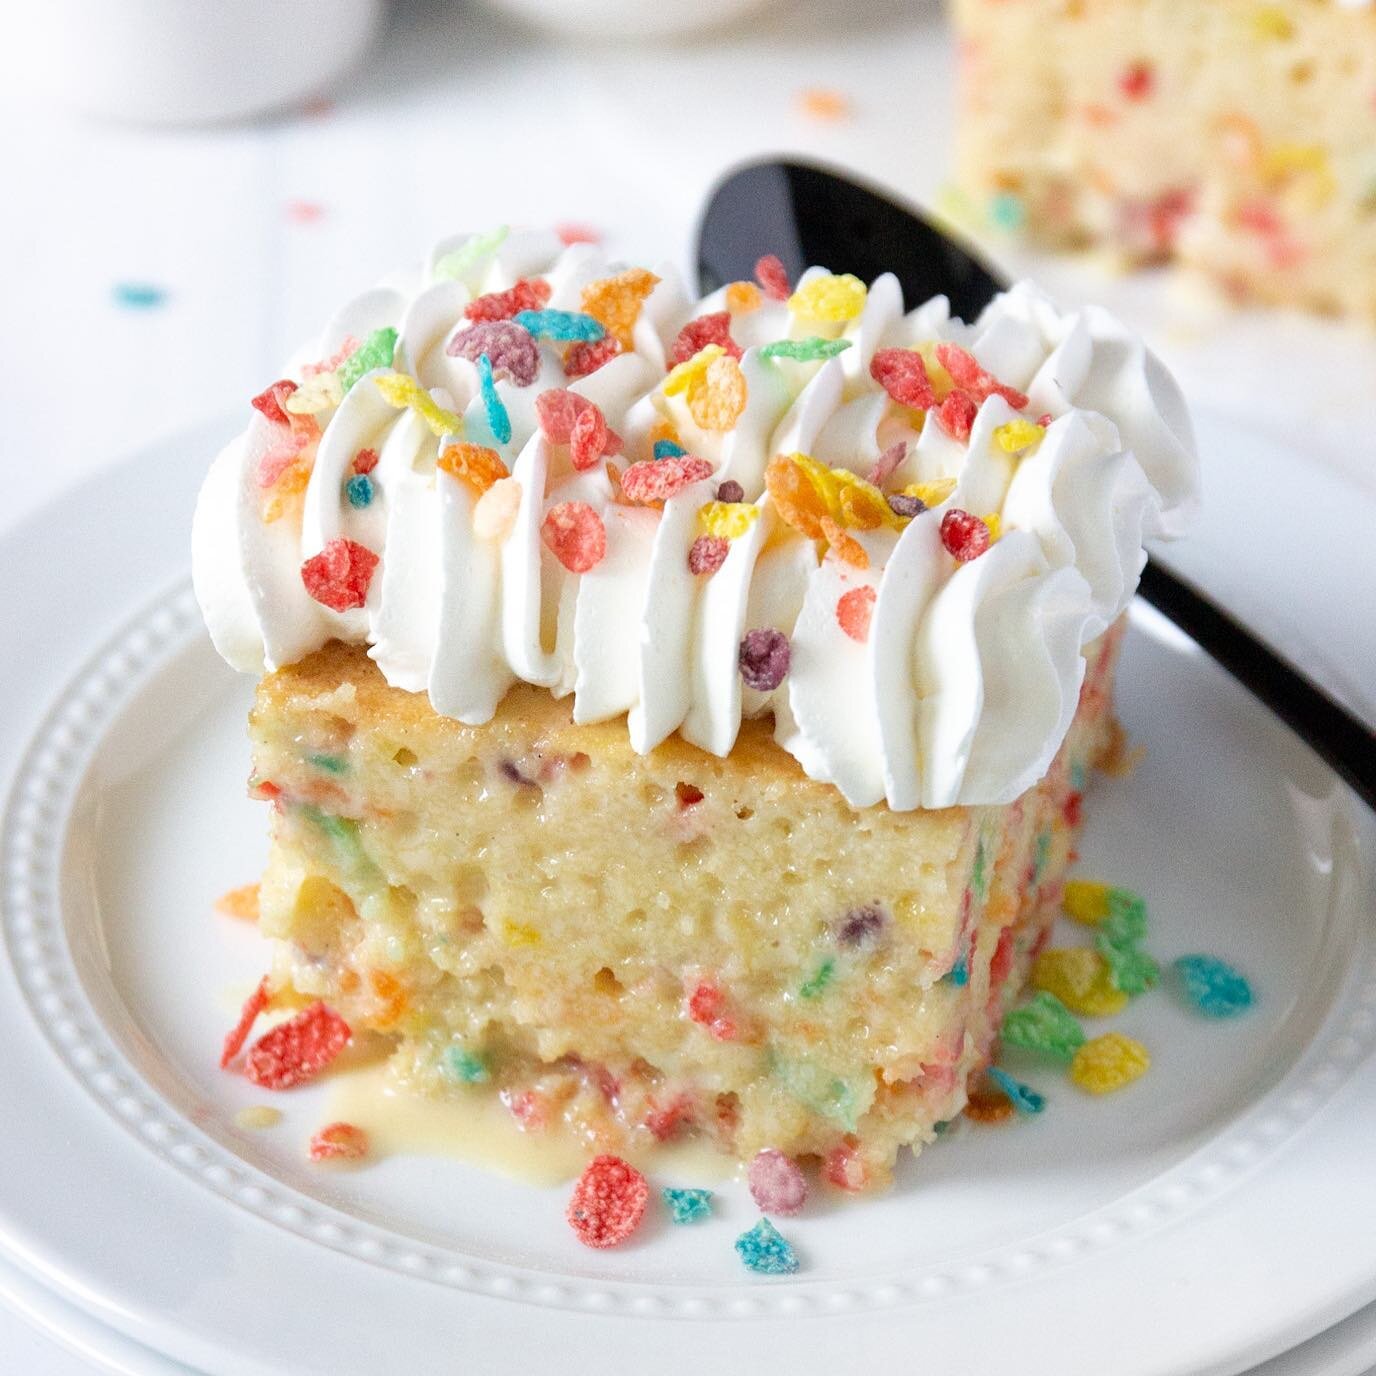 FRUITY PEBBLES TRES LECHES CAKE!! Look at that heavenly slice of deliciousness 😍 Stop by either location and grab a piece to celebrate National Cereal Day today!! 🤩

📸: @amy.sheree #livelifeonecupcakeatatime #designerdessertsbakery